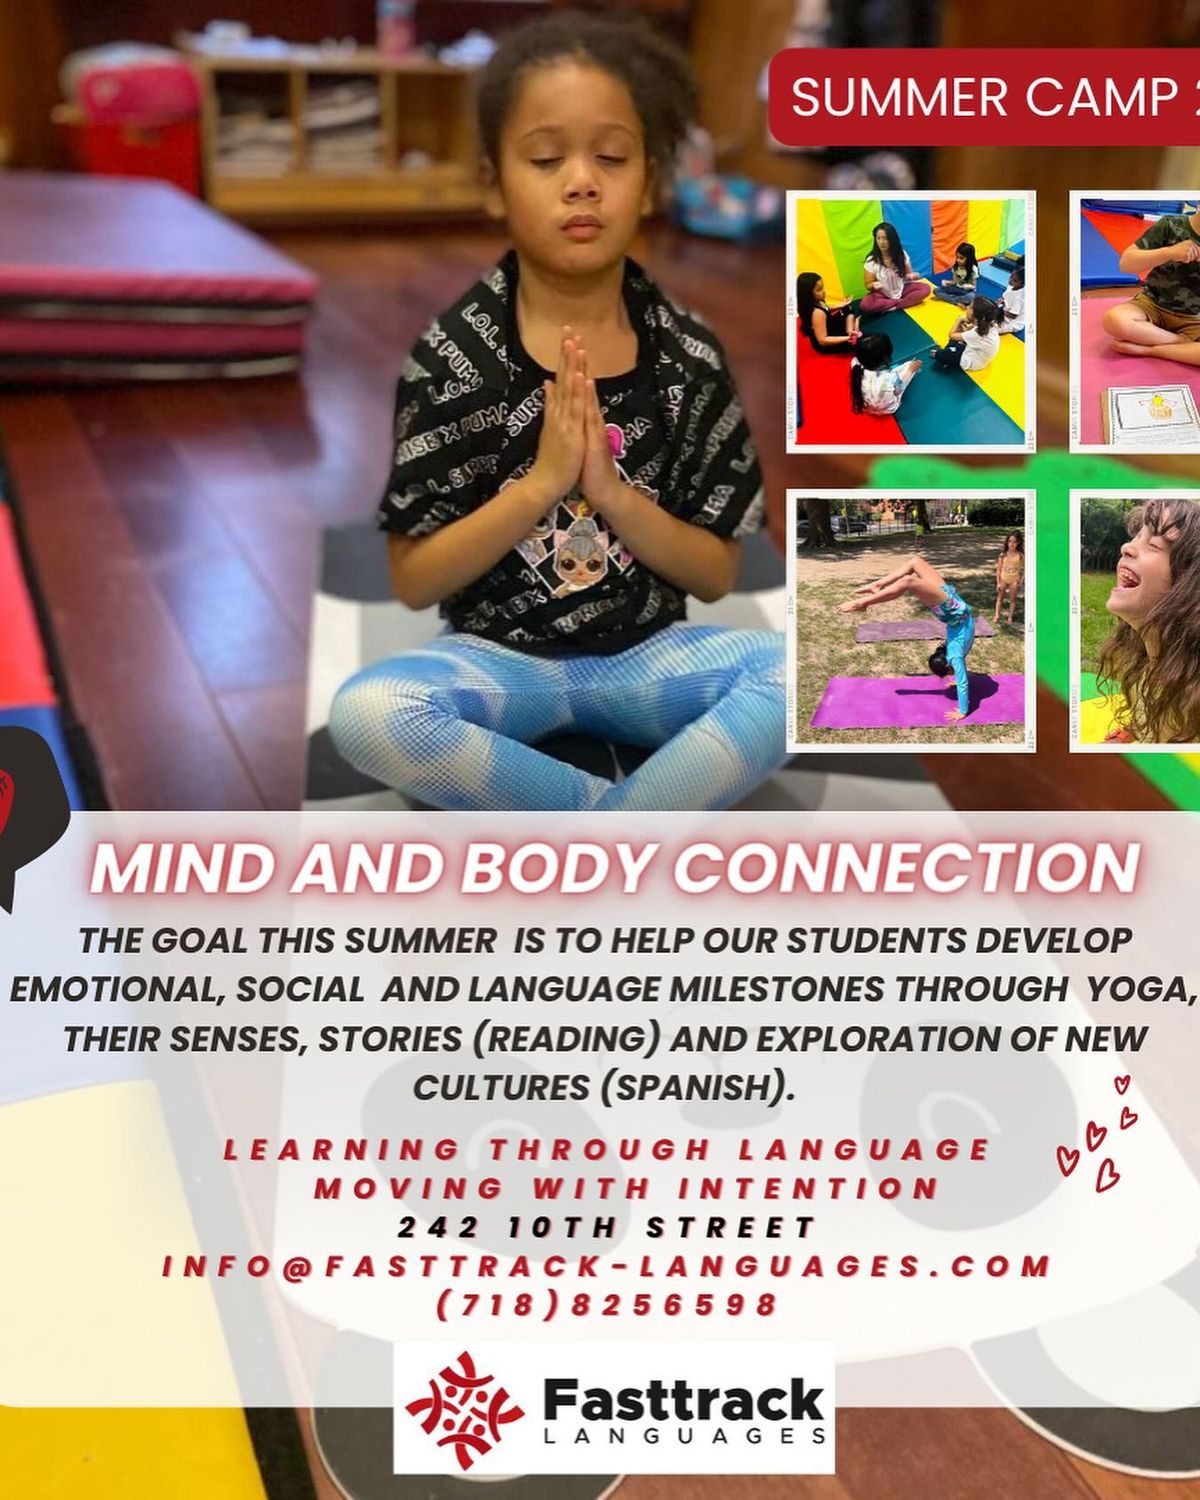 Summer Camp - Mind and Body Connection